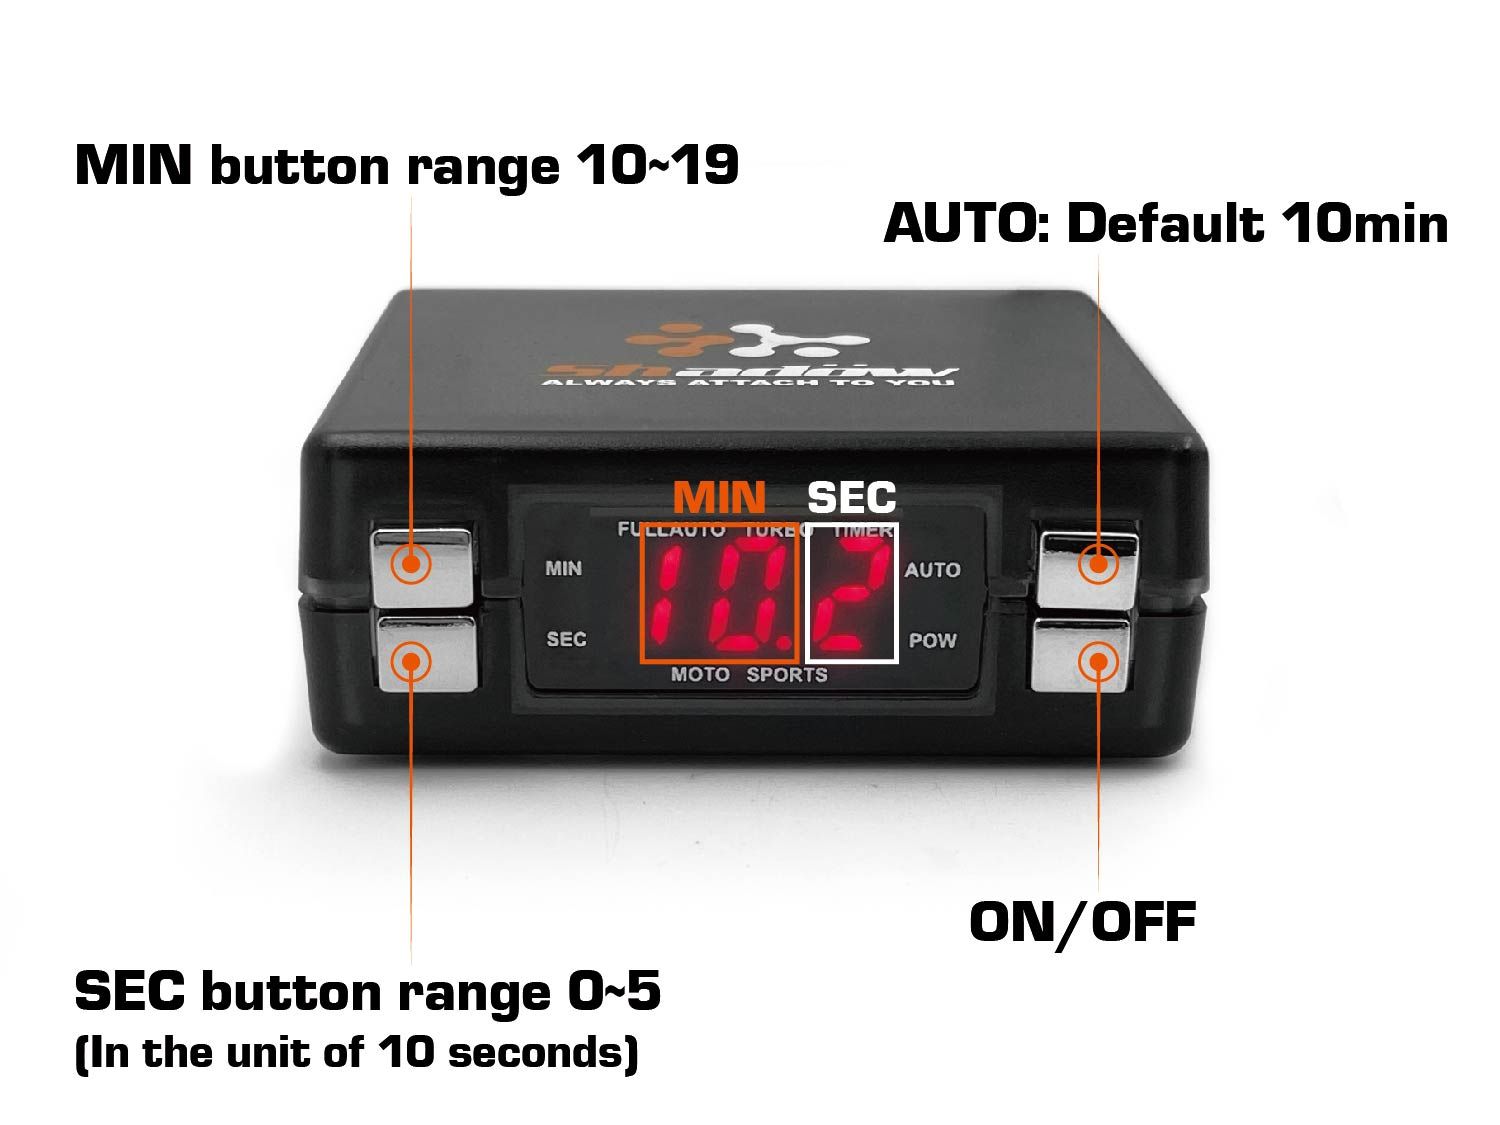 Turbo timer button function